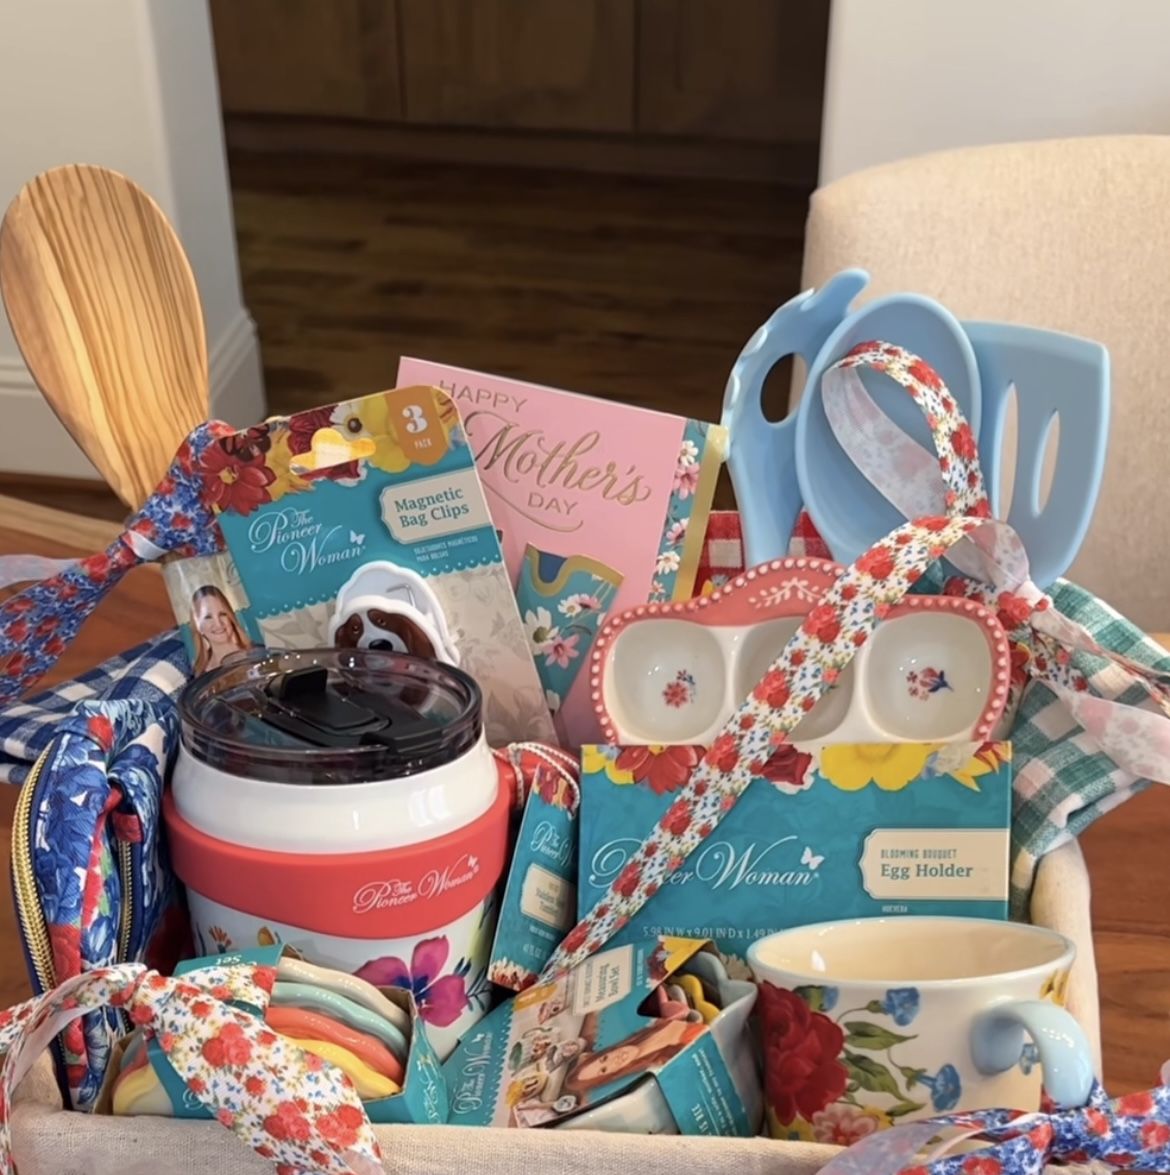 Mothers Day Gift Baskets: Mothers Day Coffee Gift Basket